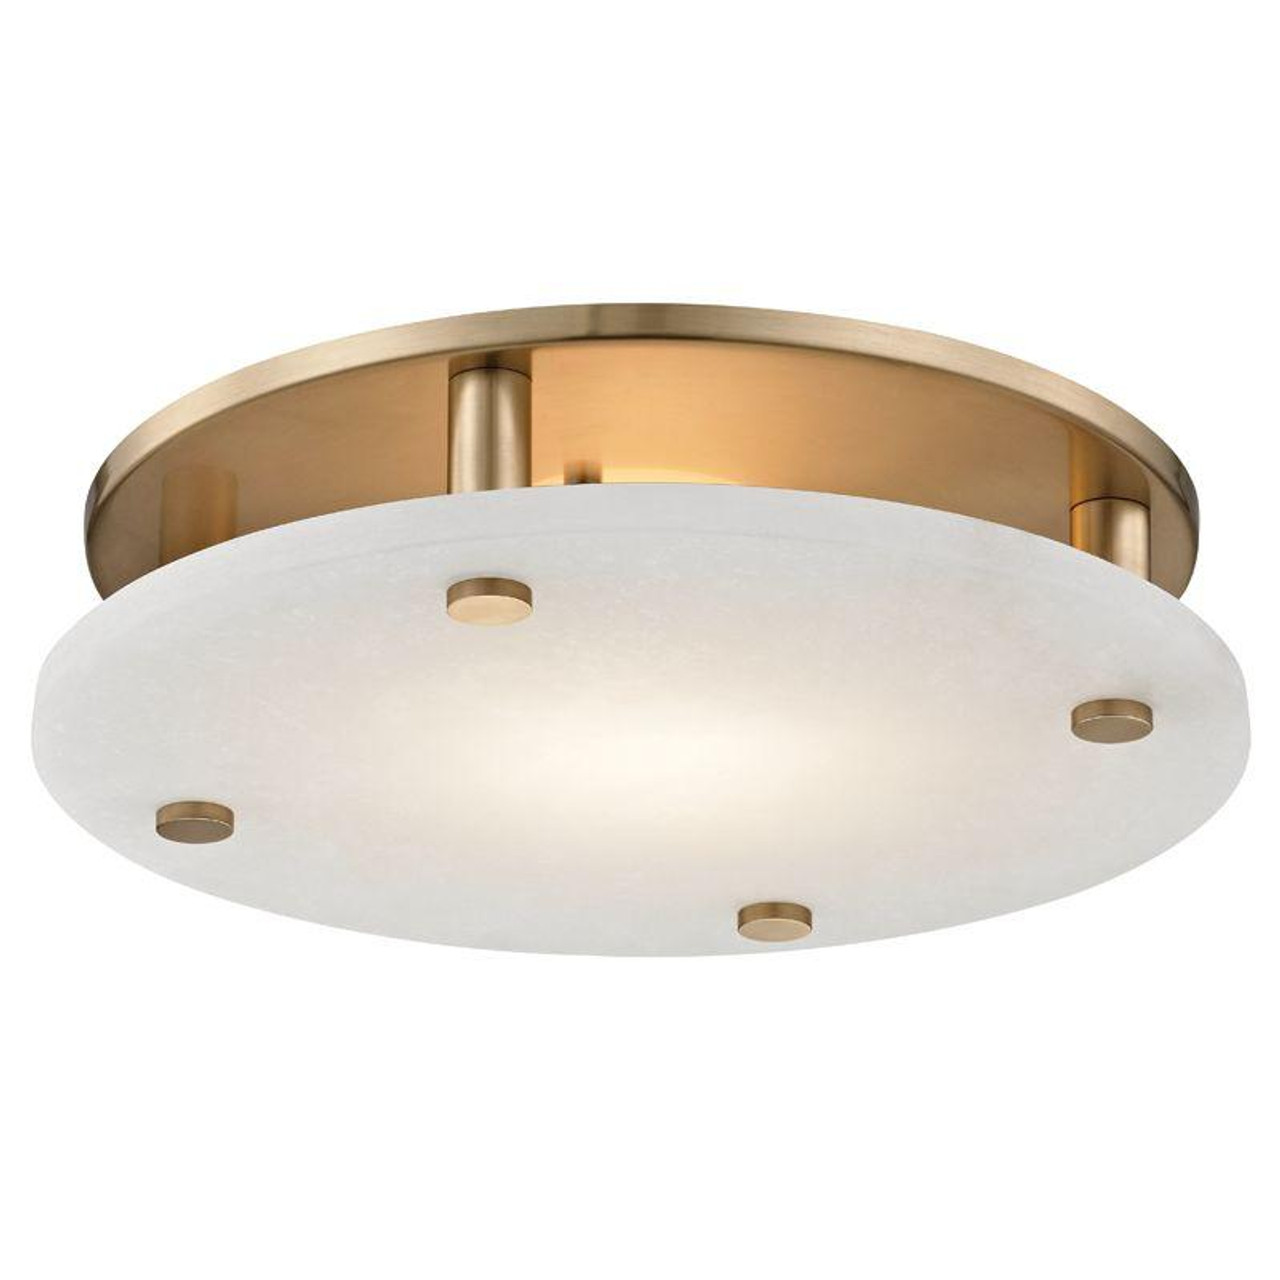 LARGE LED FLUSH MOUNT, Hudson Valley 4715-AGB A2A18 Hudson Valley Other Flush  Mount